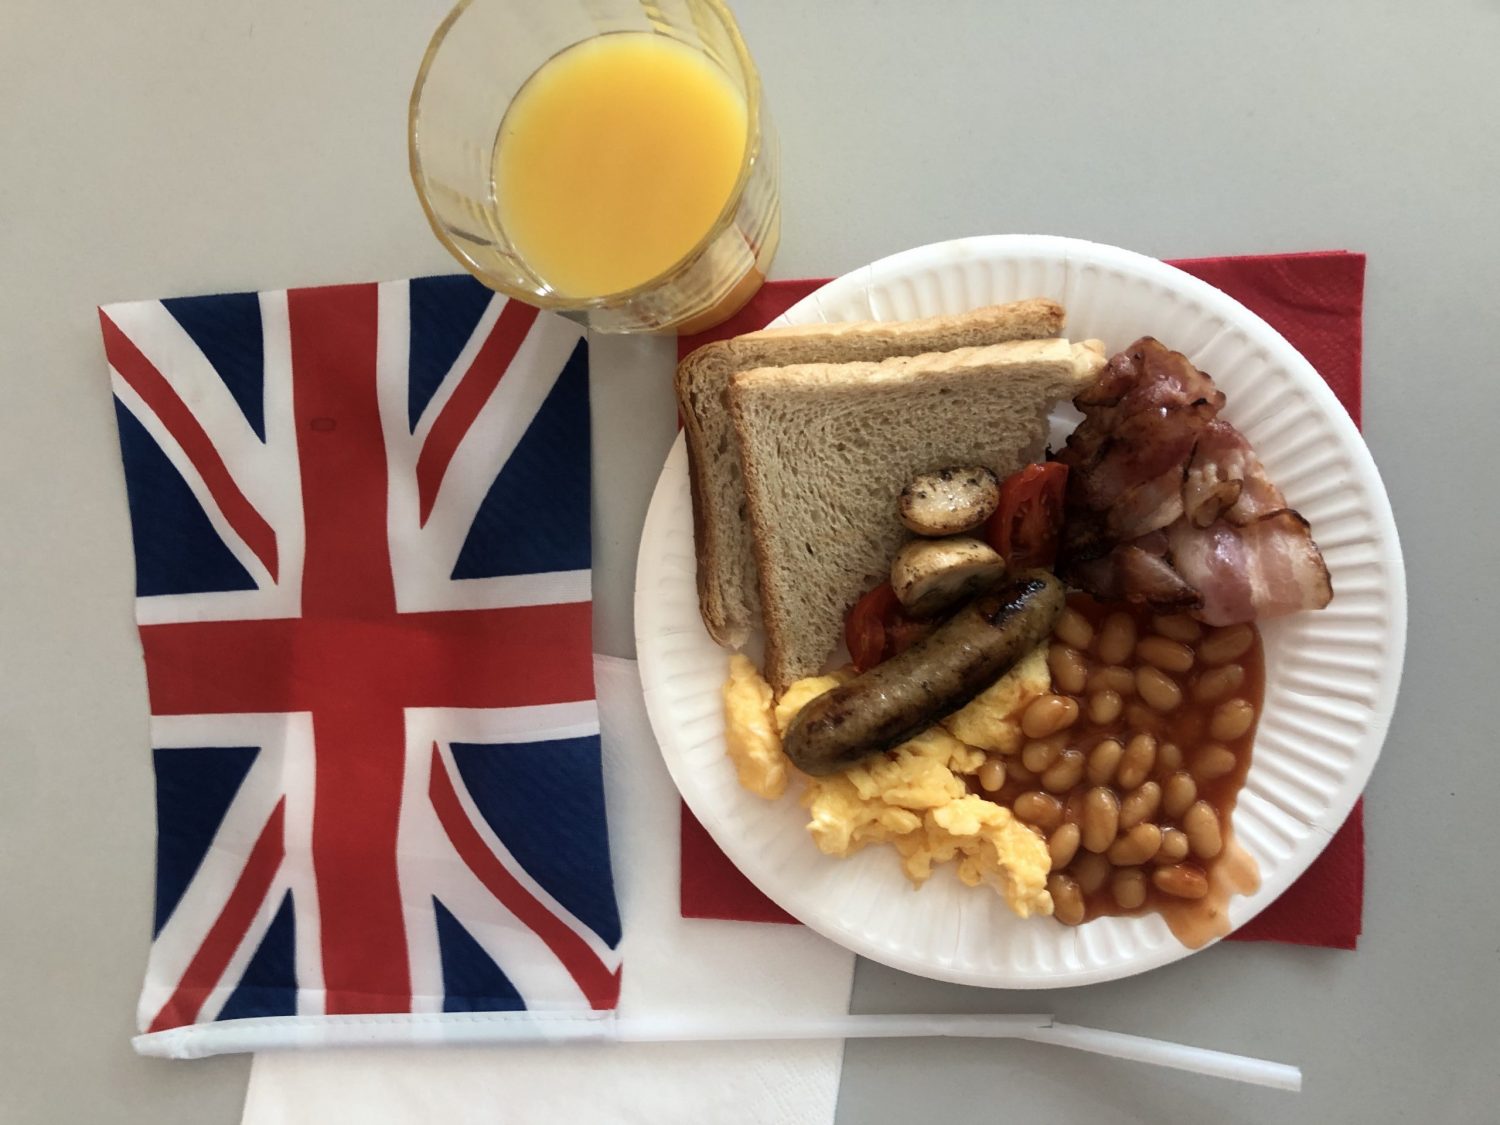 <strong>1A – Let’s have a full English breakfast</strong>